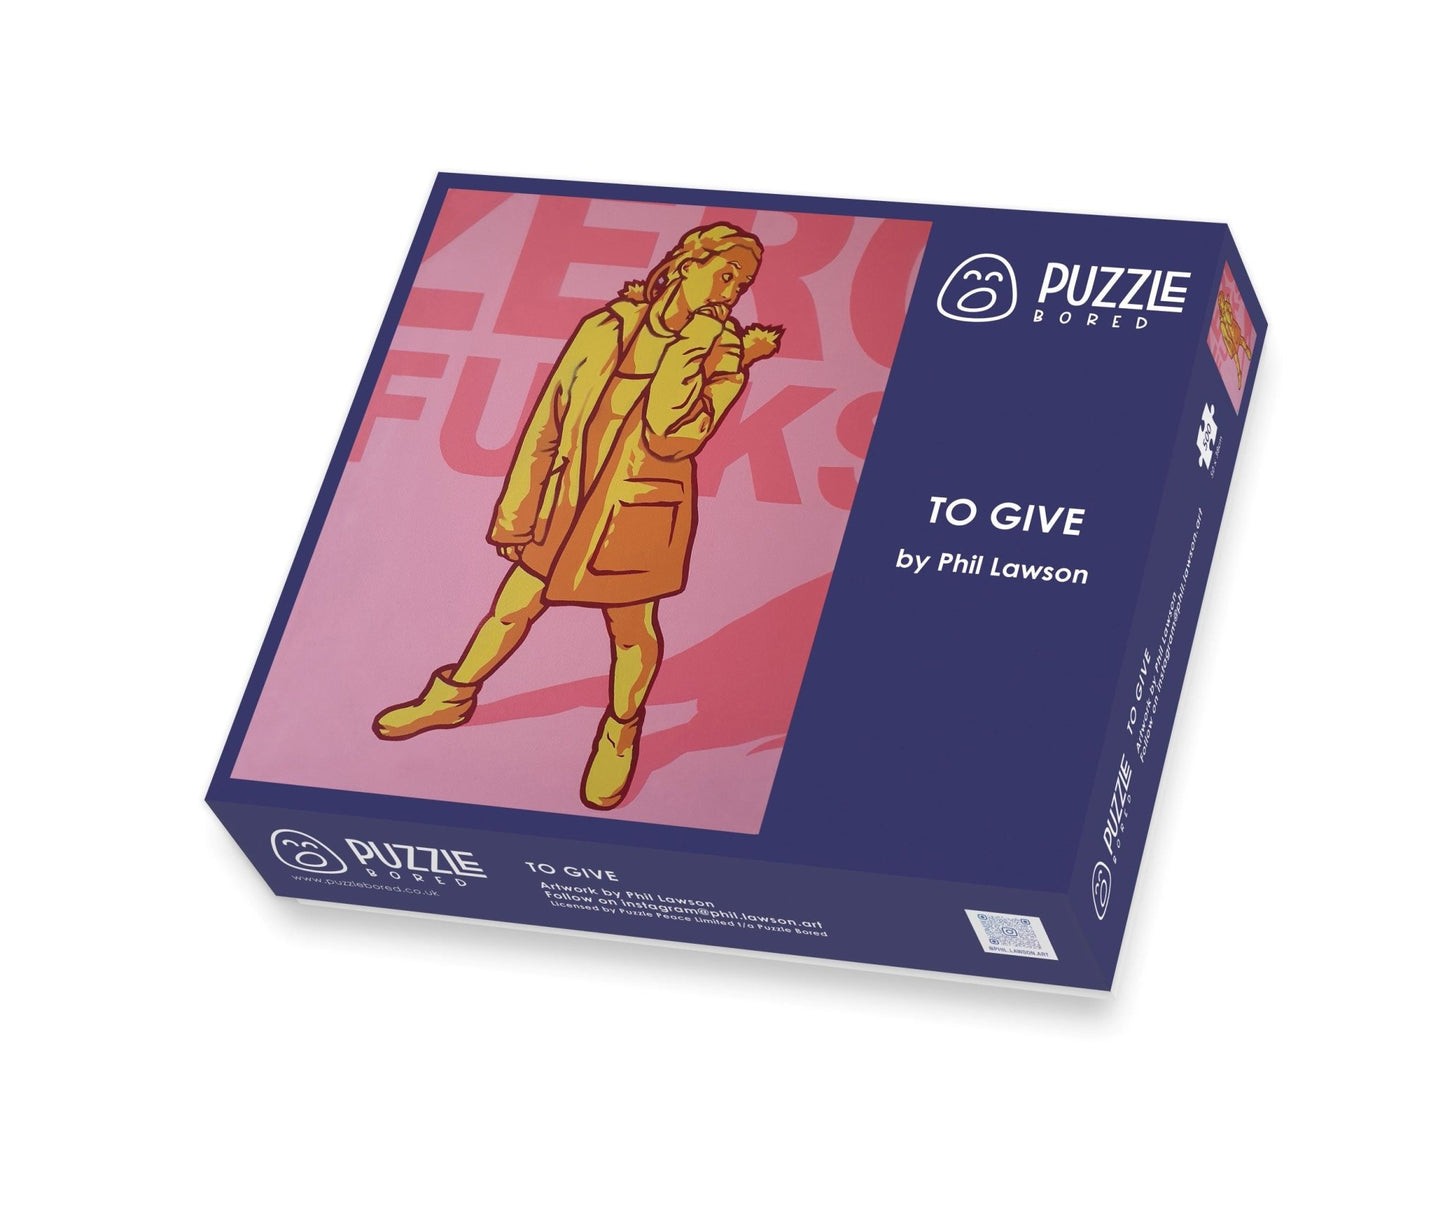 To Give by Phil Lawson - Puzzle Bored